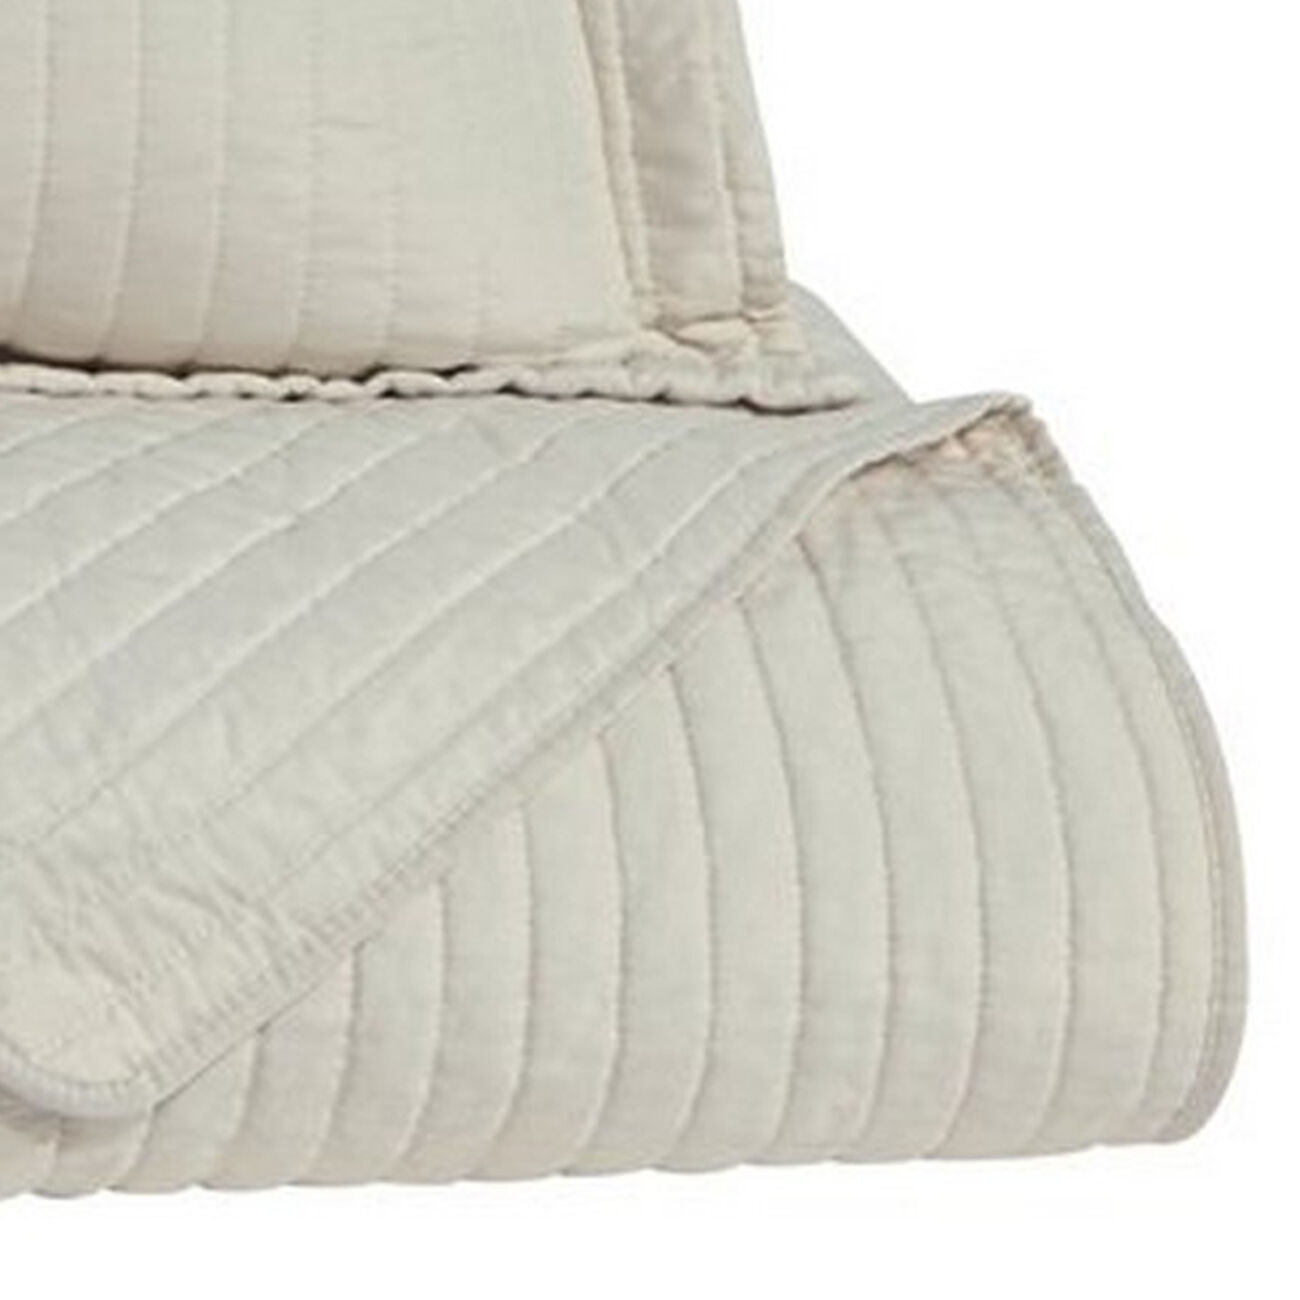 3 Piece Fabric King Coverlet Set with Stitched Ribbing Texture, Cream